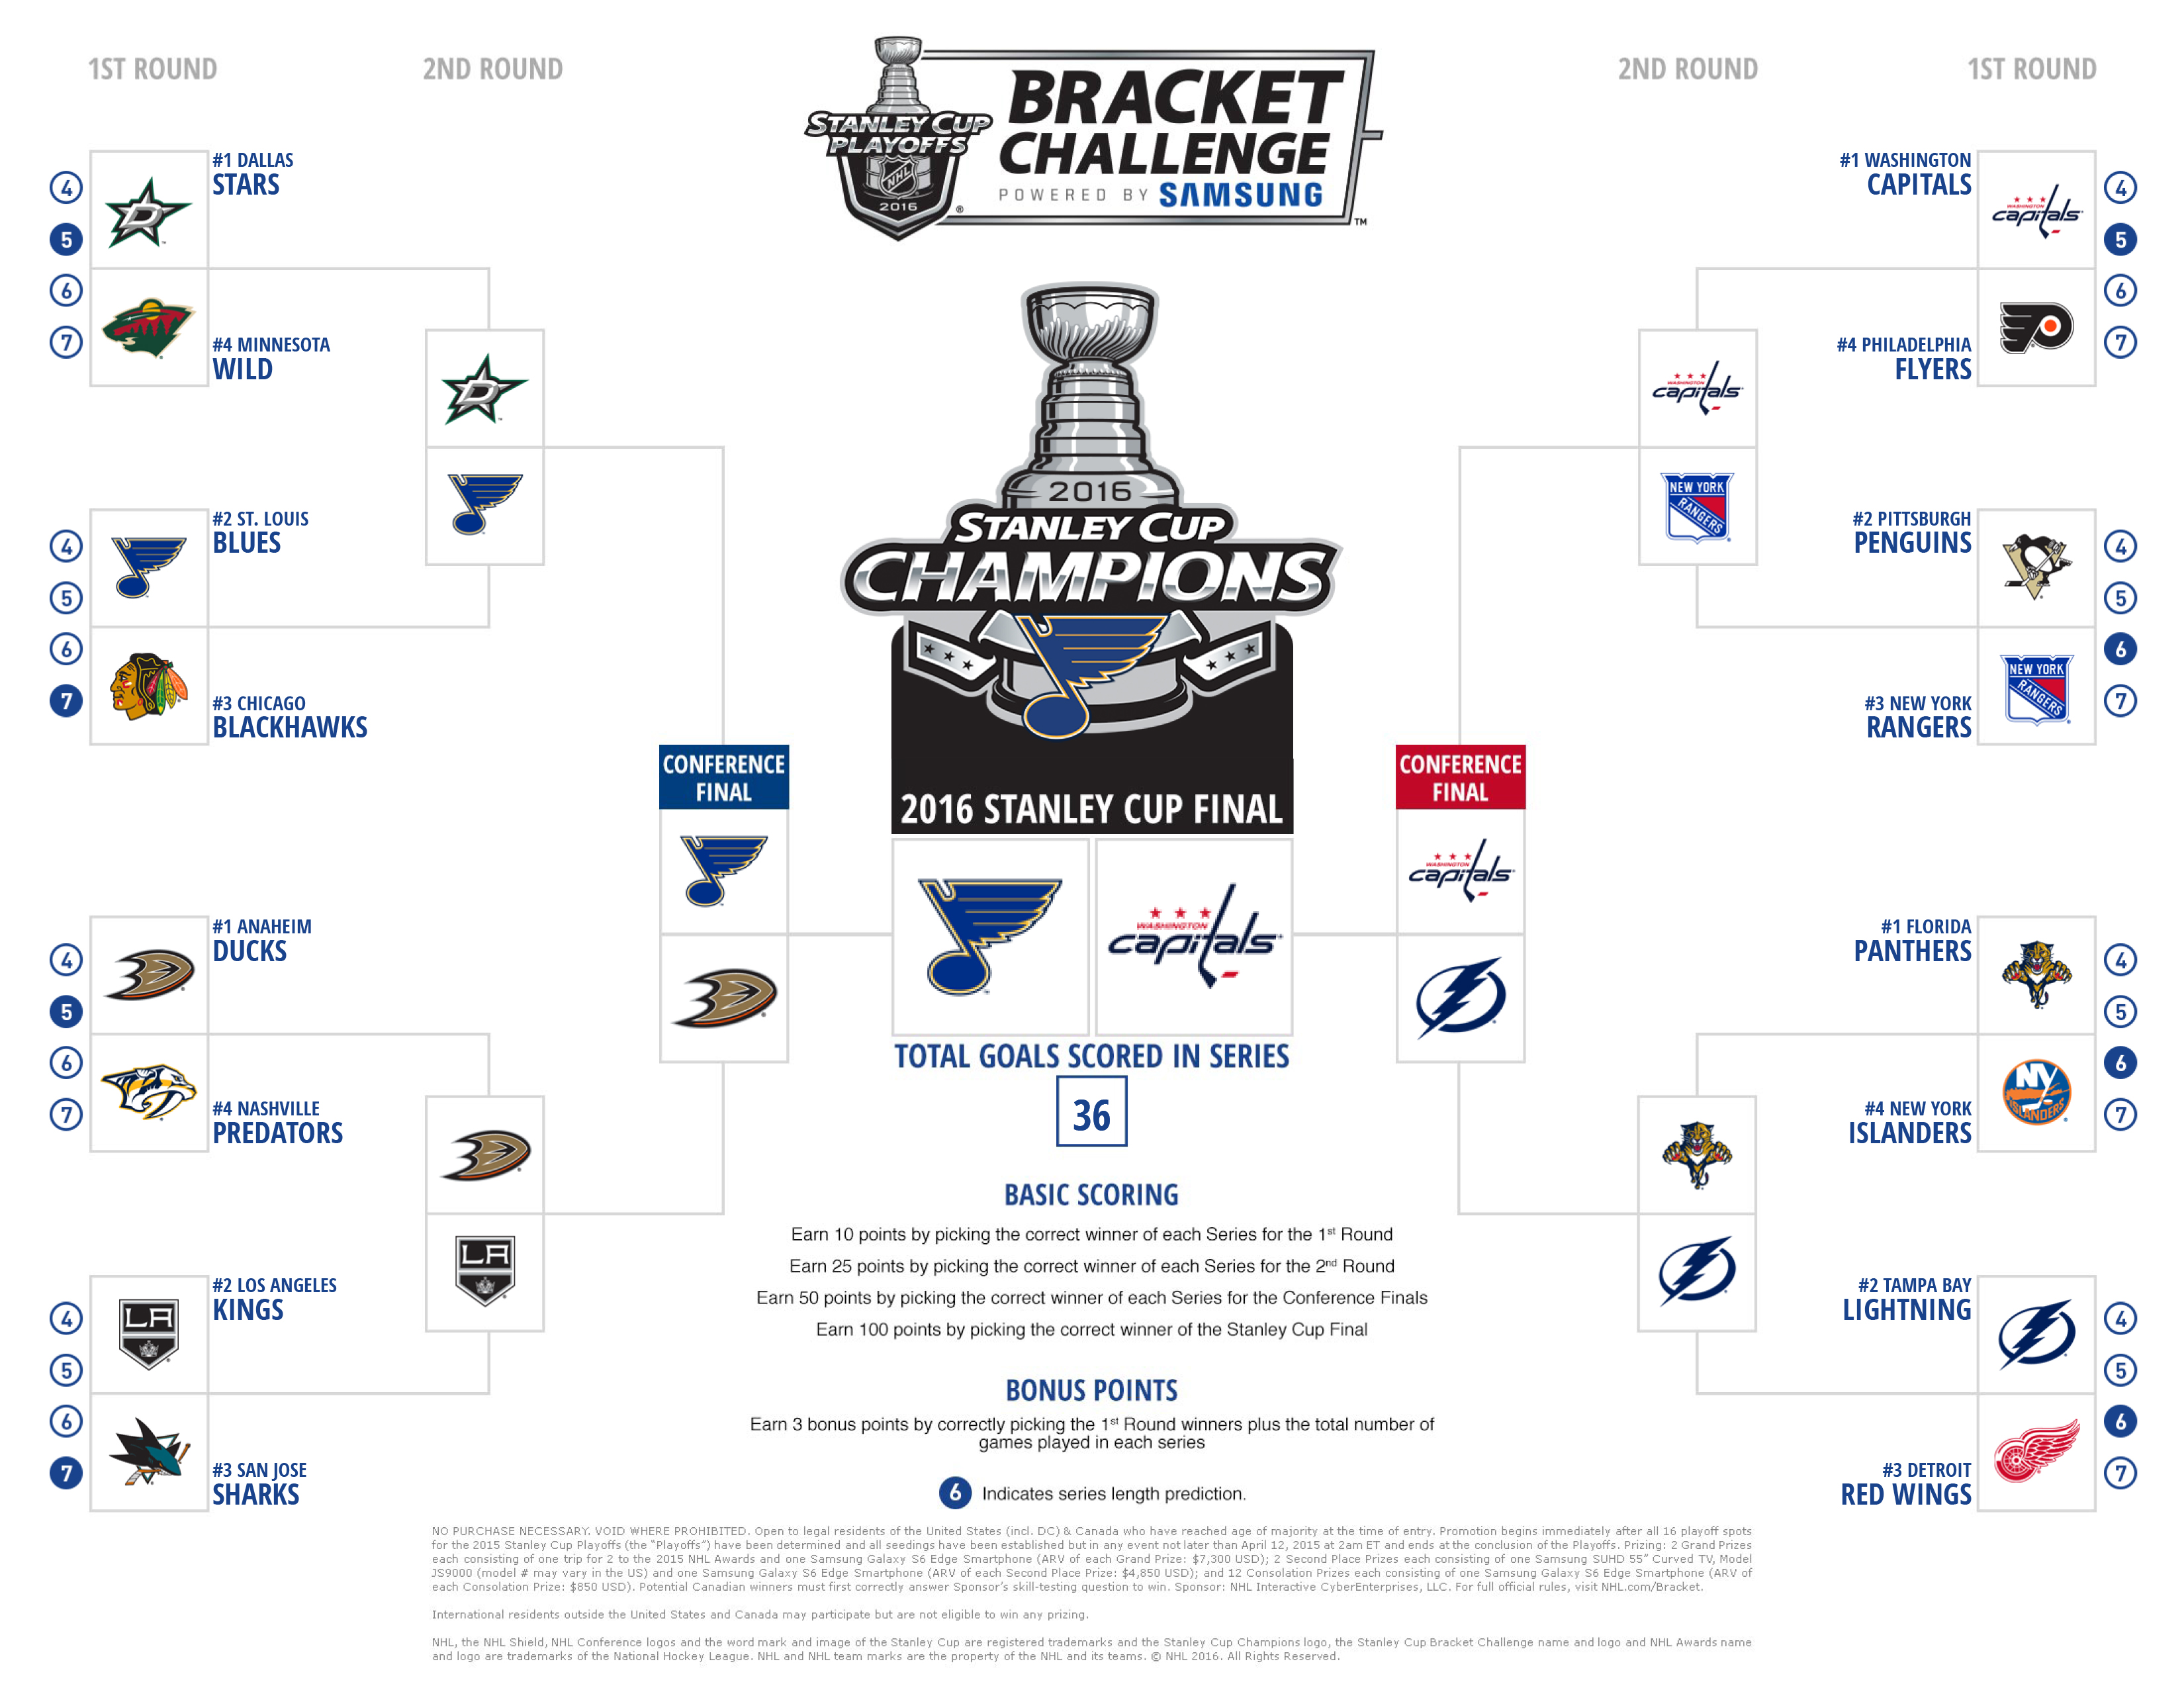 2016 Stanley Cup Brackets: How'd I Do 